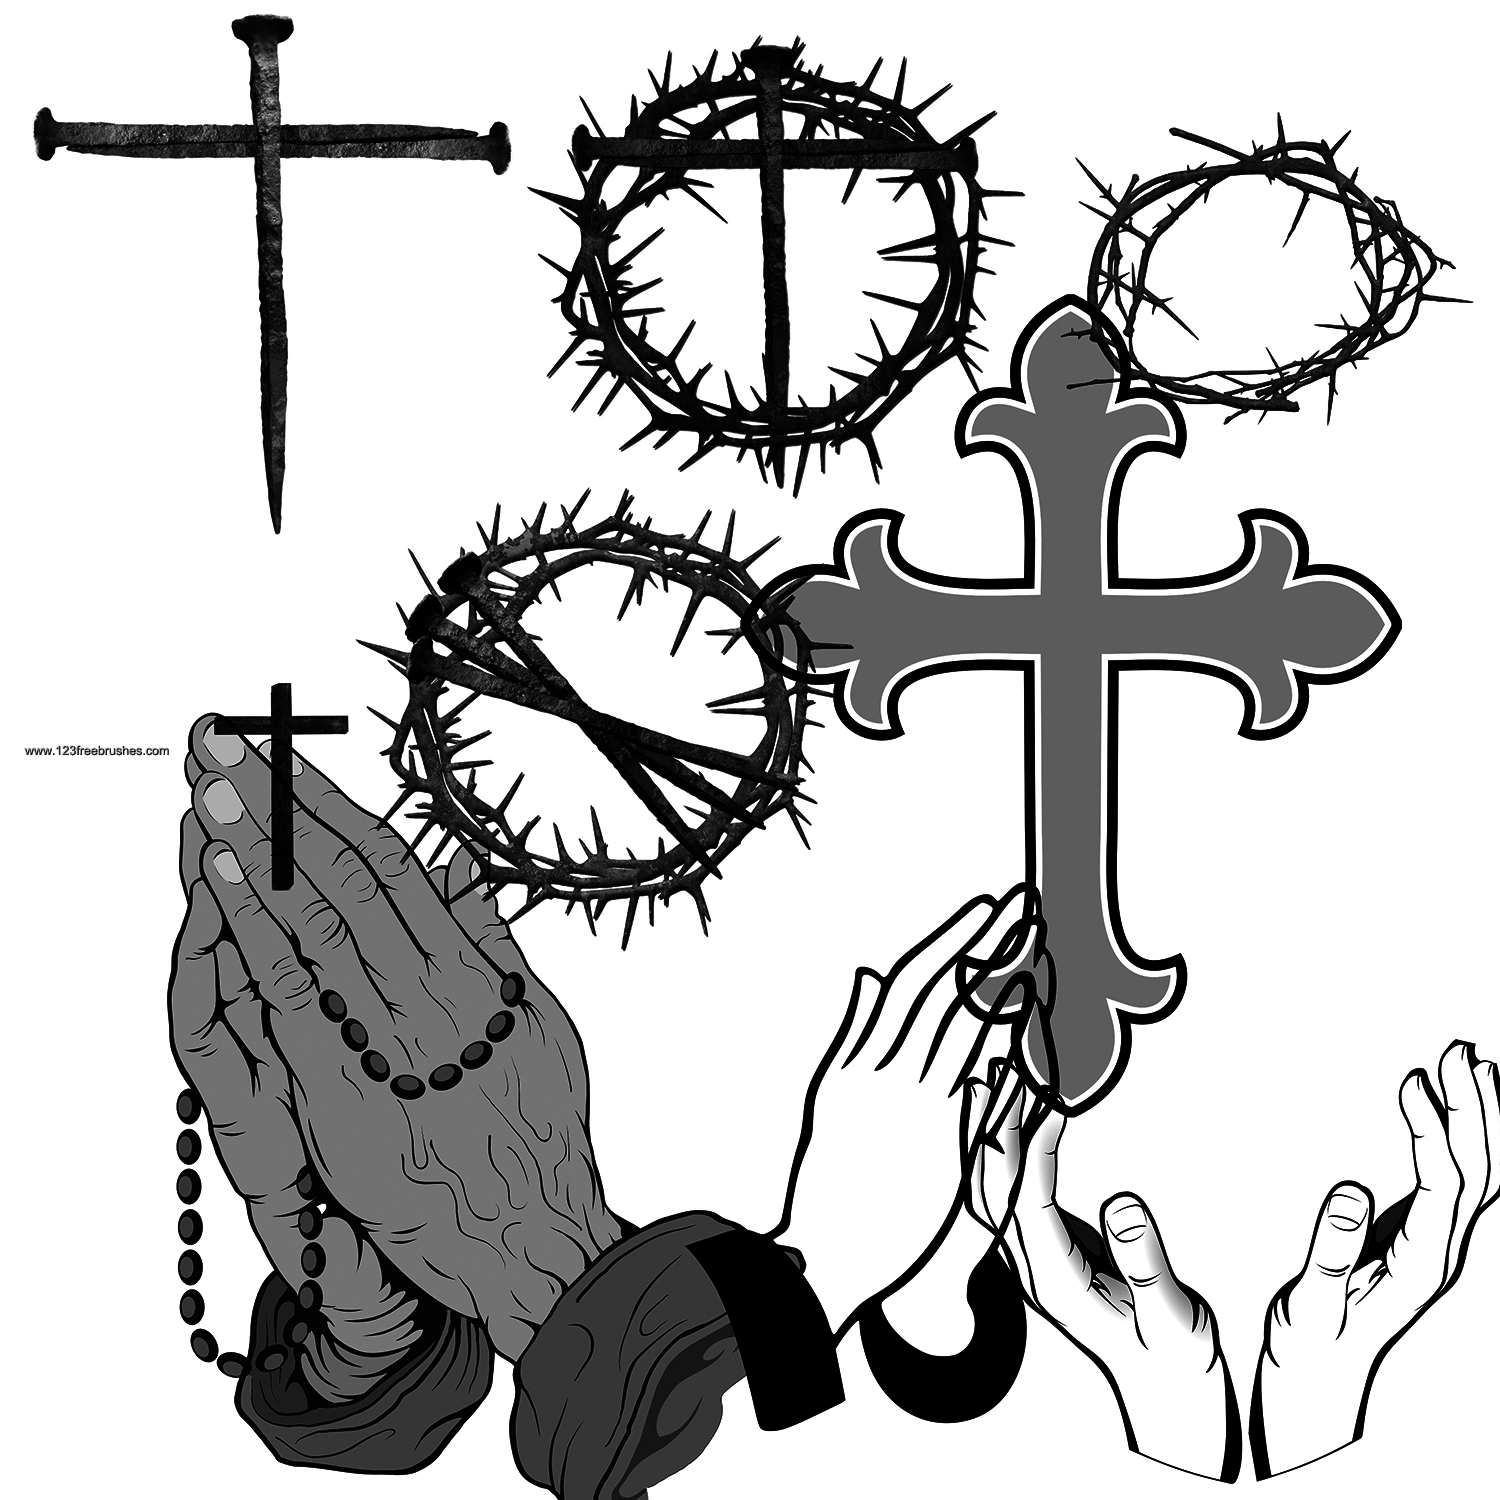 Religious Praying Hand – Cross and Thorn